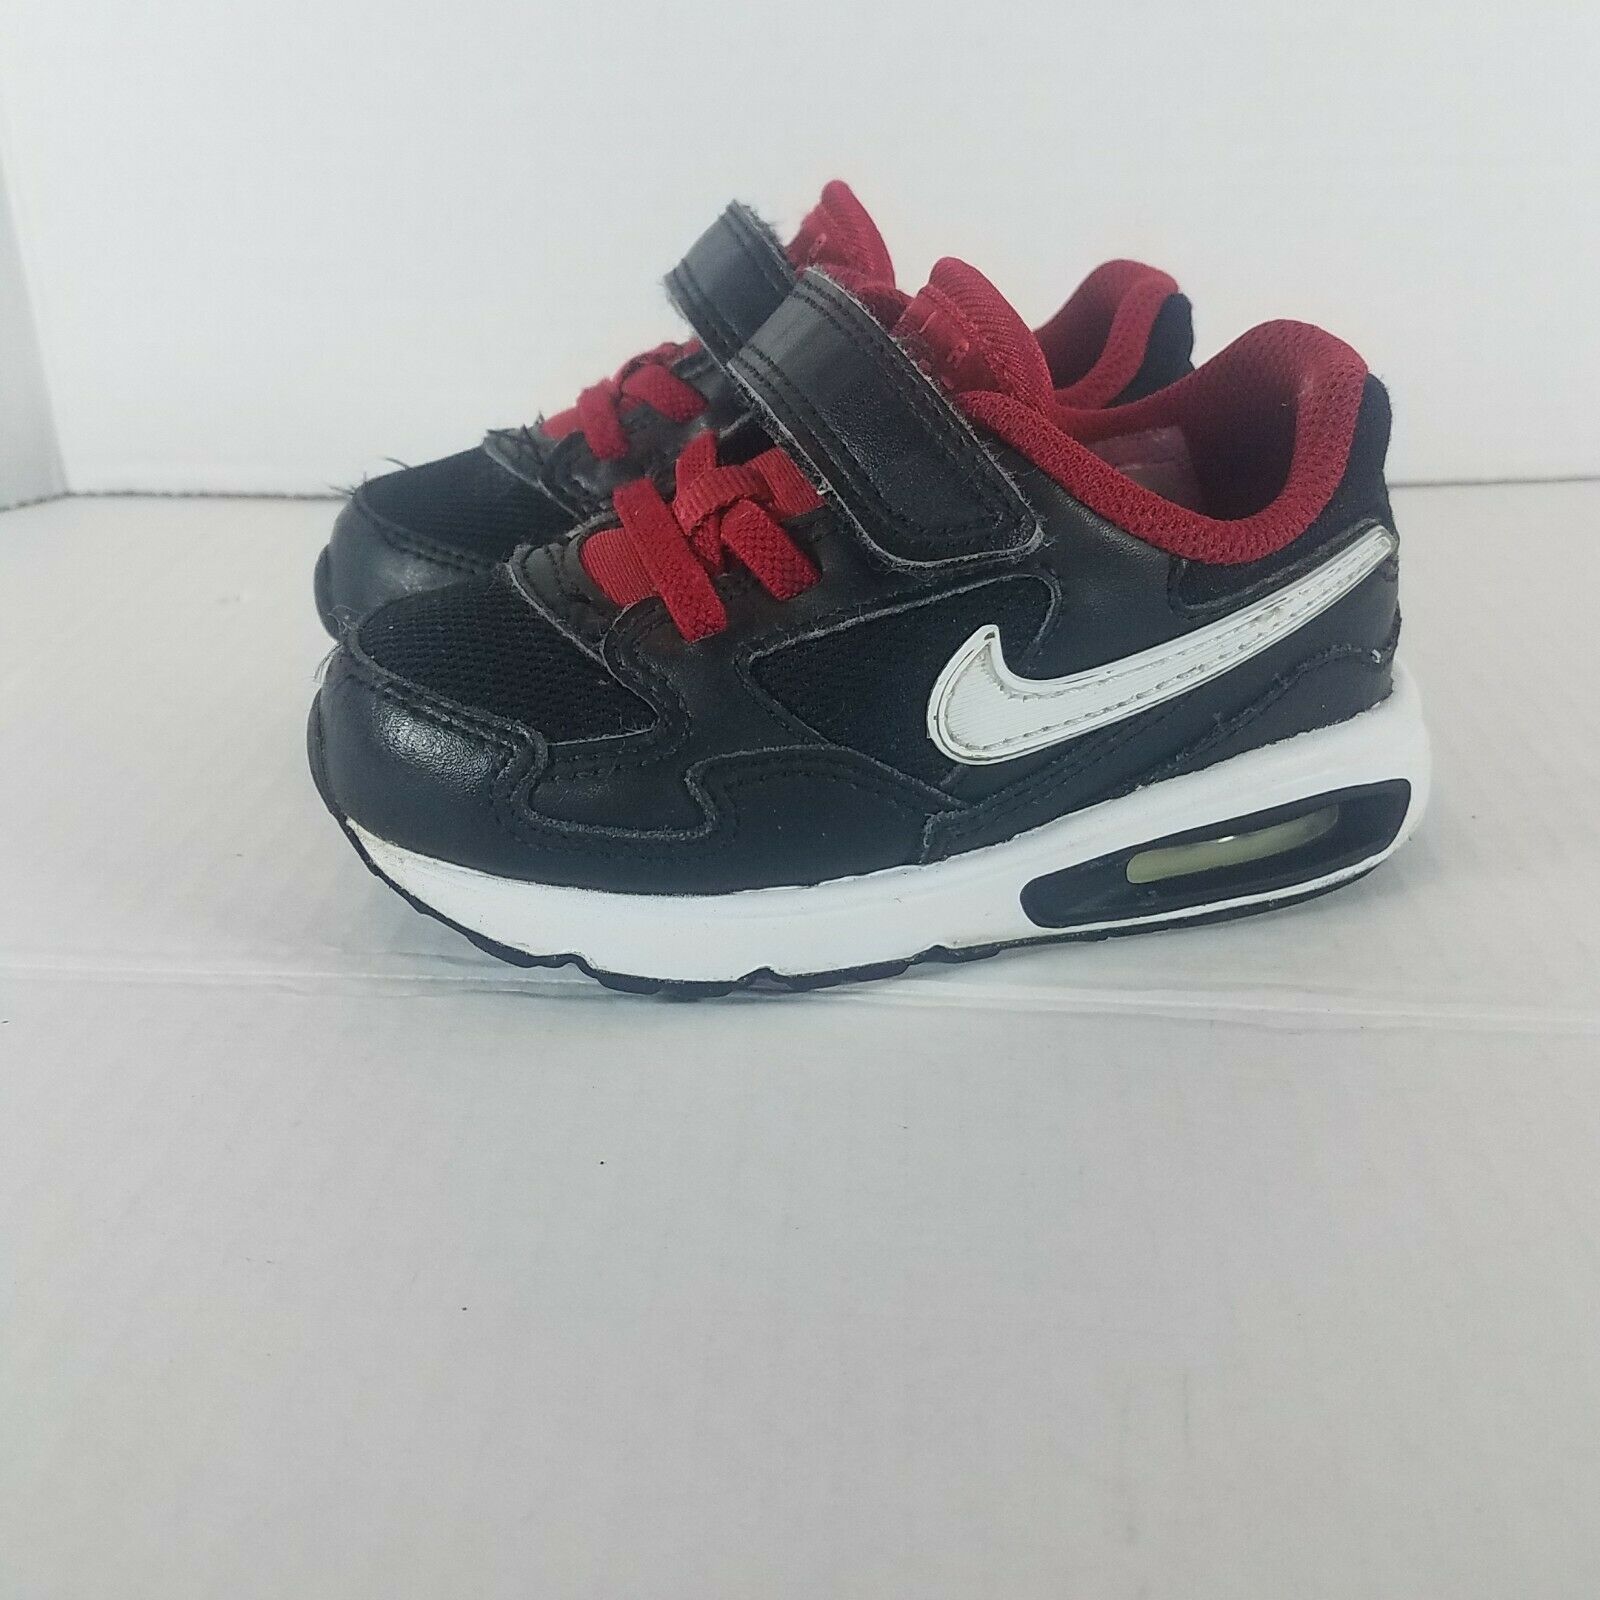 Nike Air Max ST - Toddler Boys Shoes 654289-008 - Low Top - Boys Size 7c